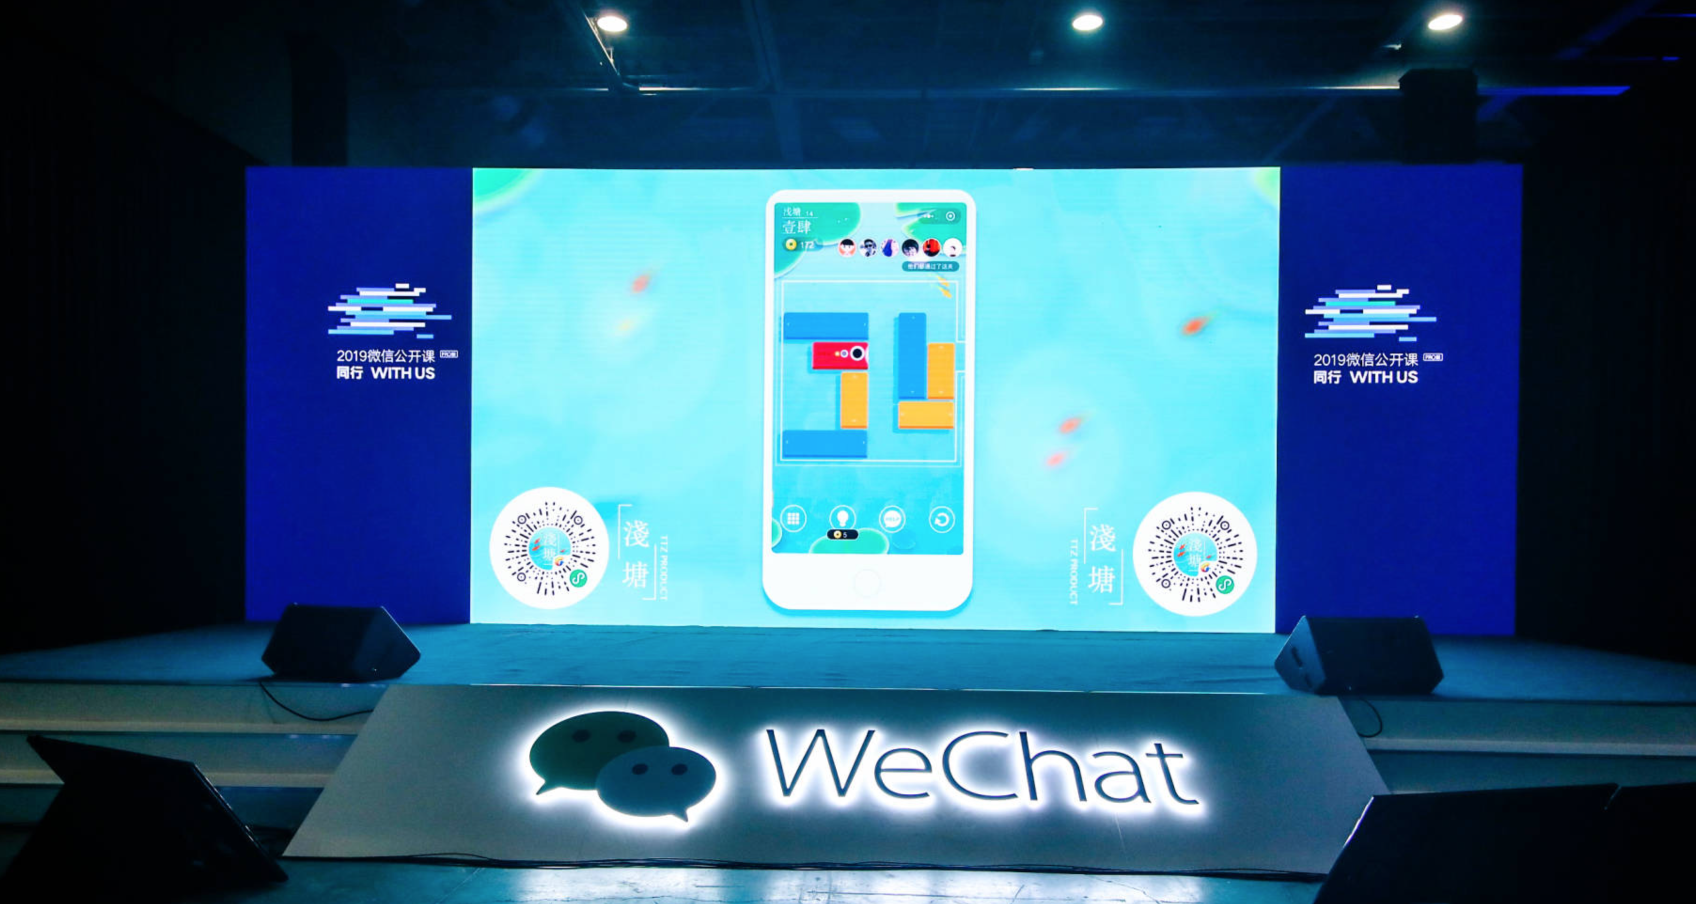 Wechat on moments pc to see WeChat PC